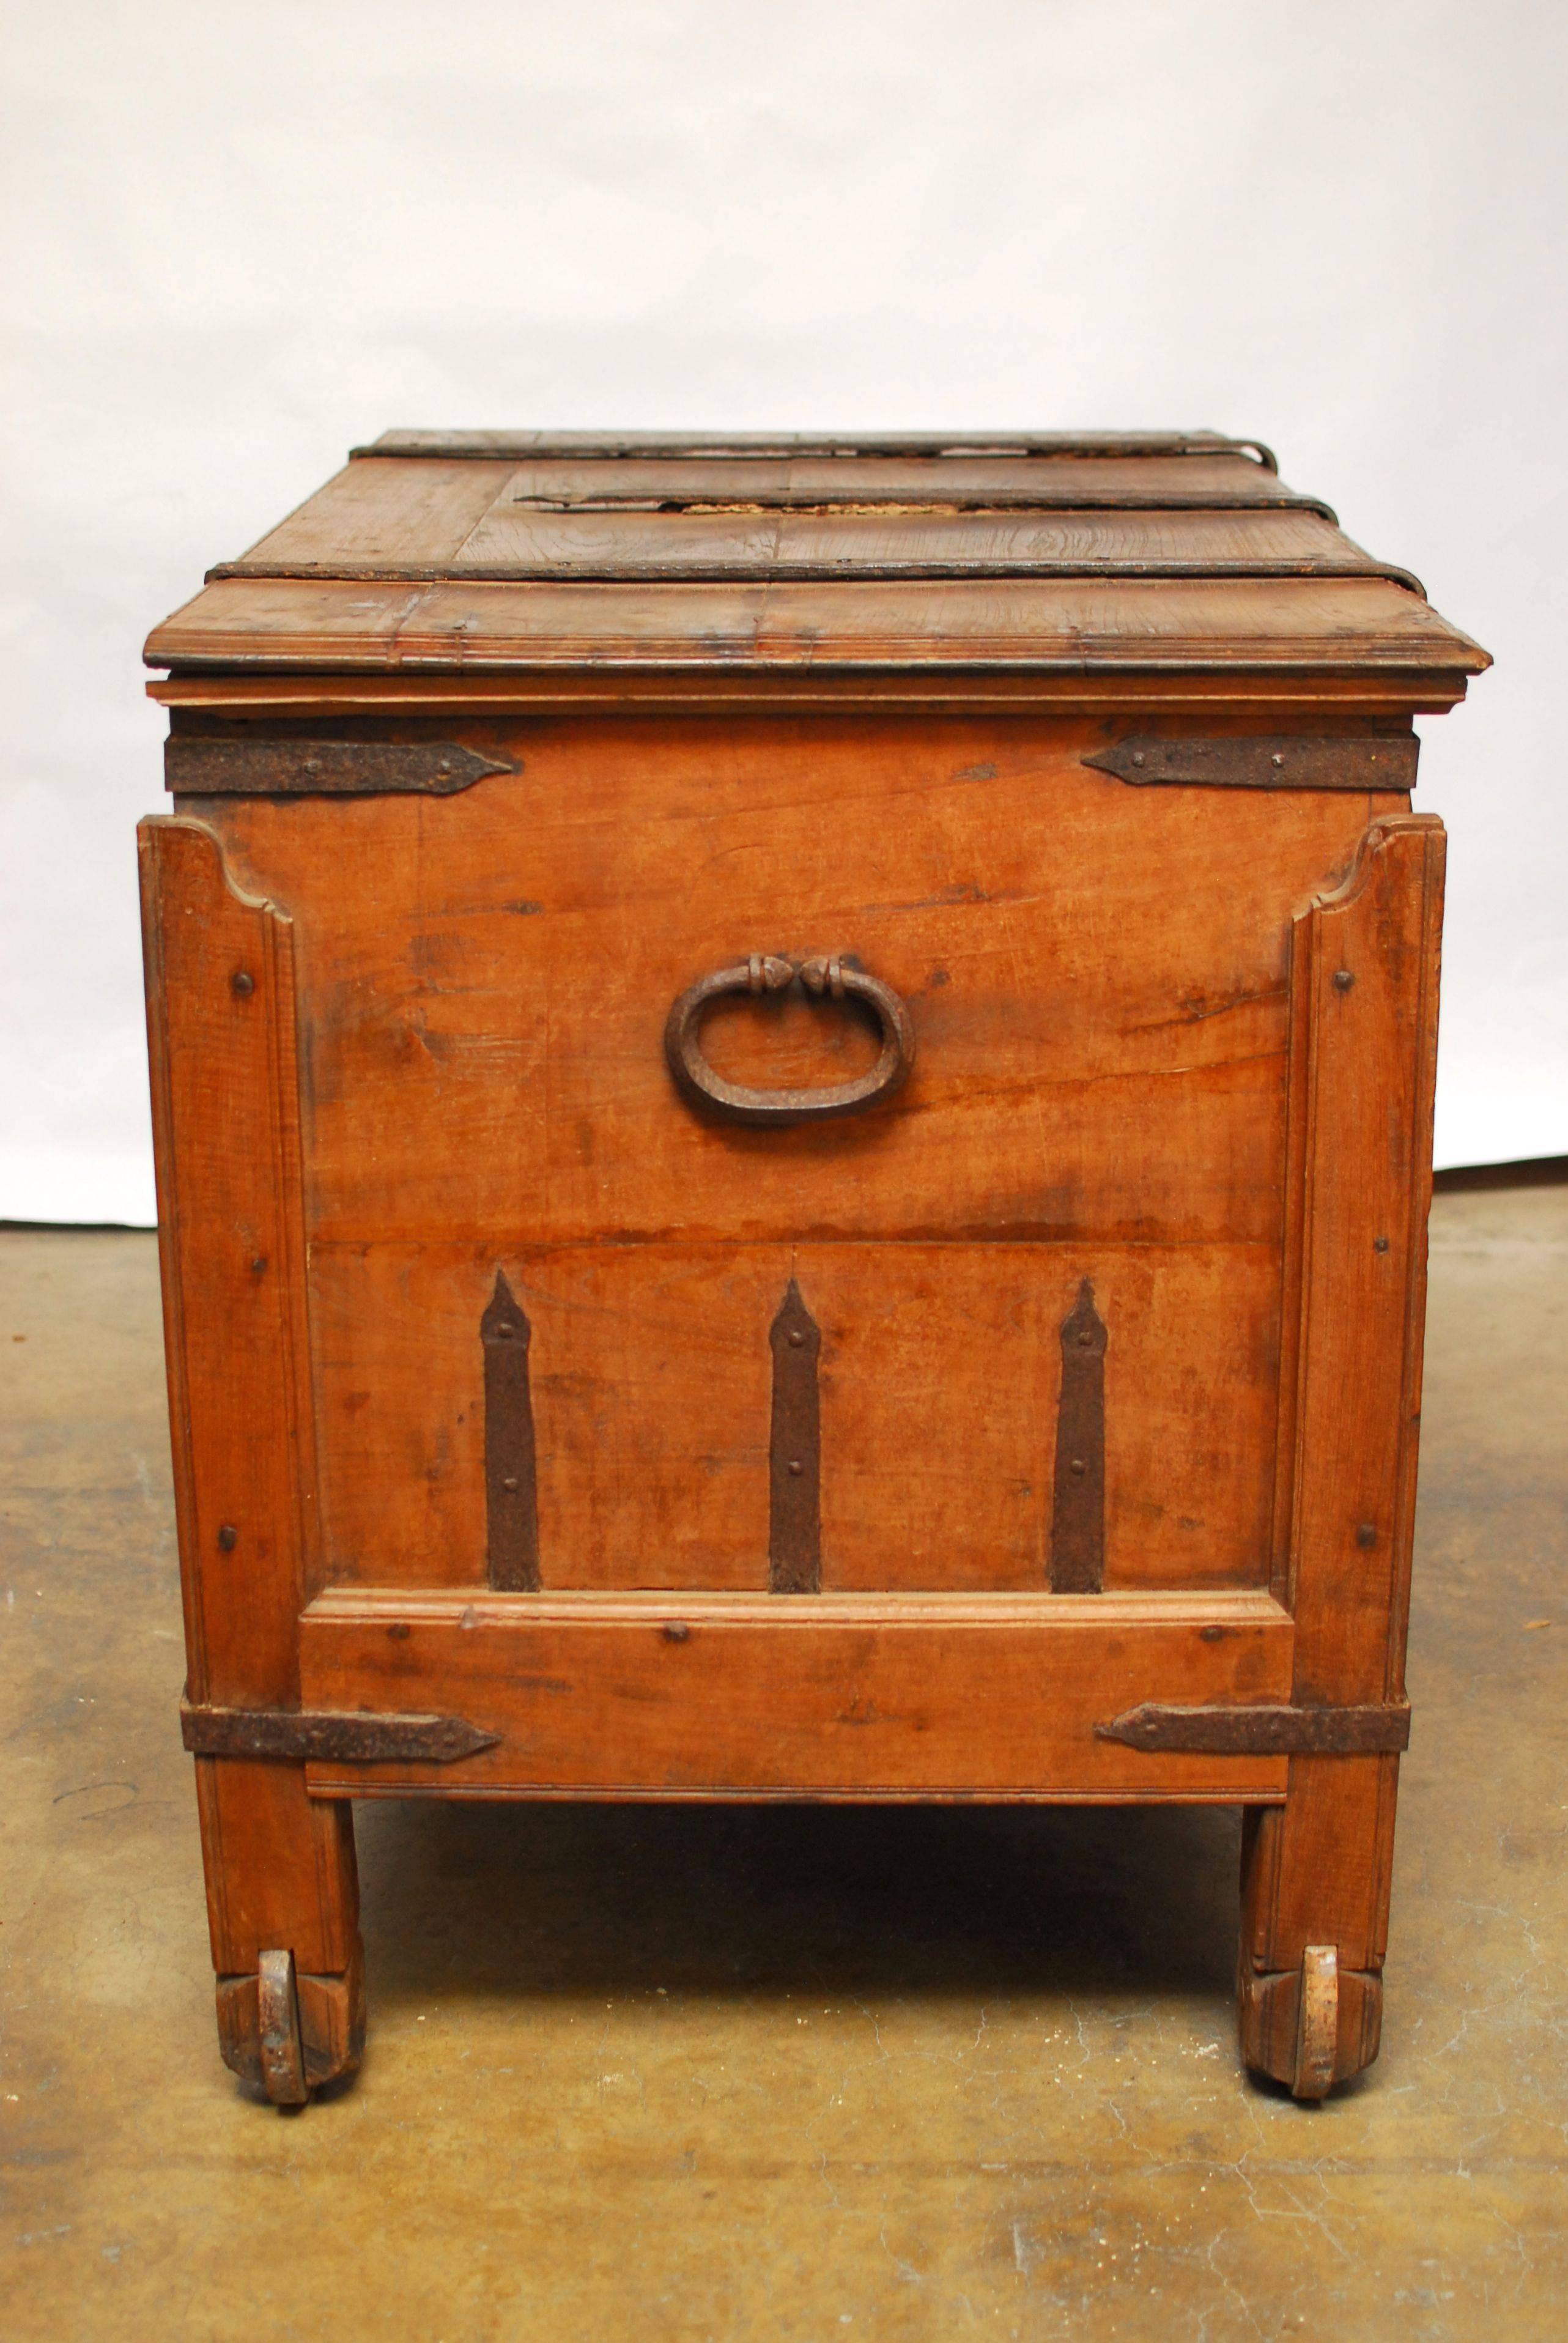 Carved 18th Century Anglo-Indian Damchiya Dowry Chest